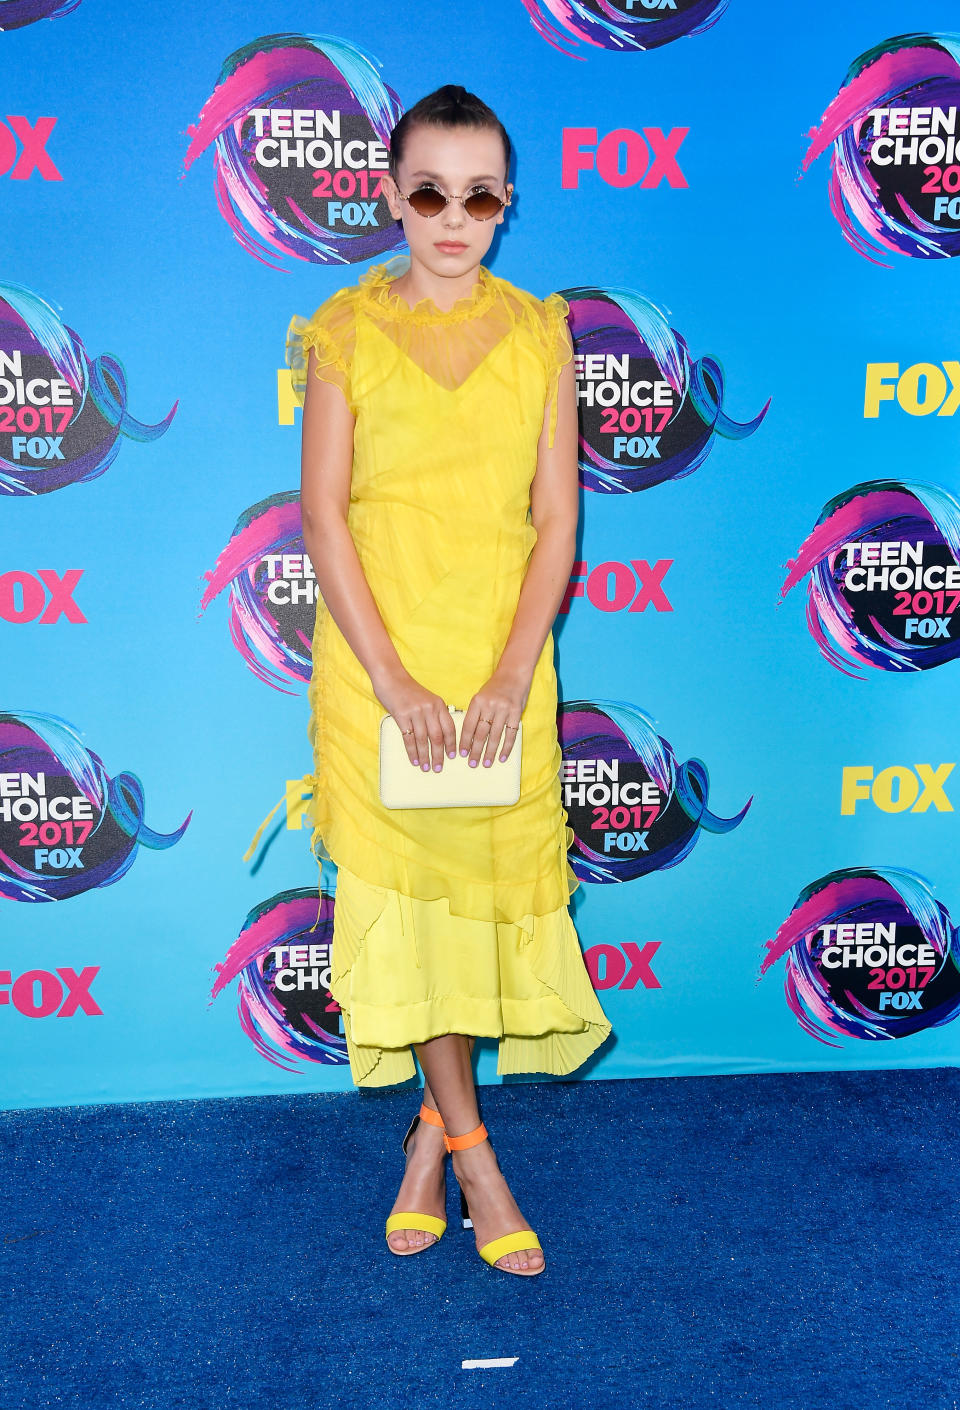 Wearing Kenzo at the Teen Choice Awards on 14 August 2017